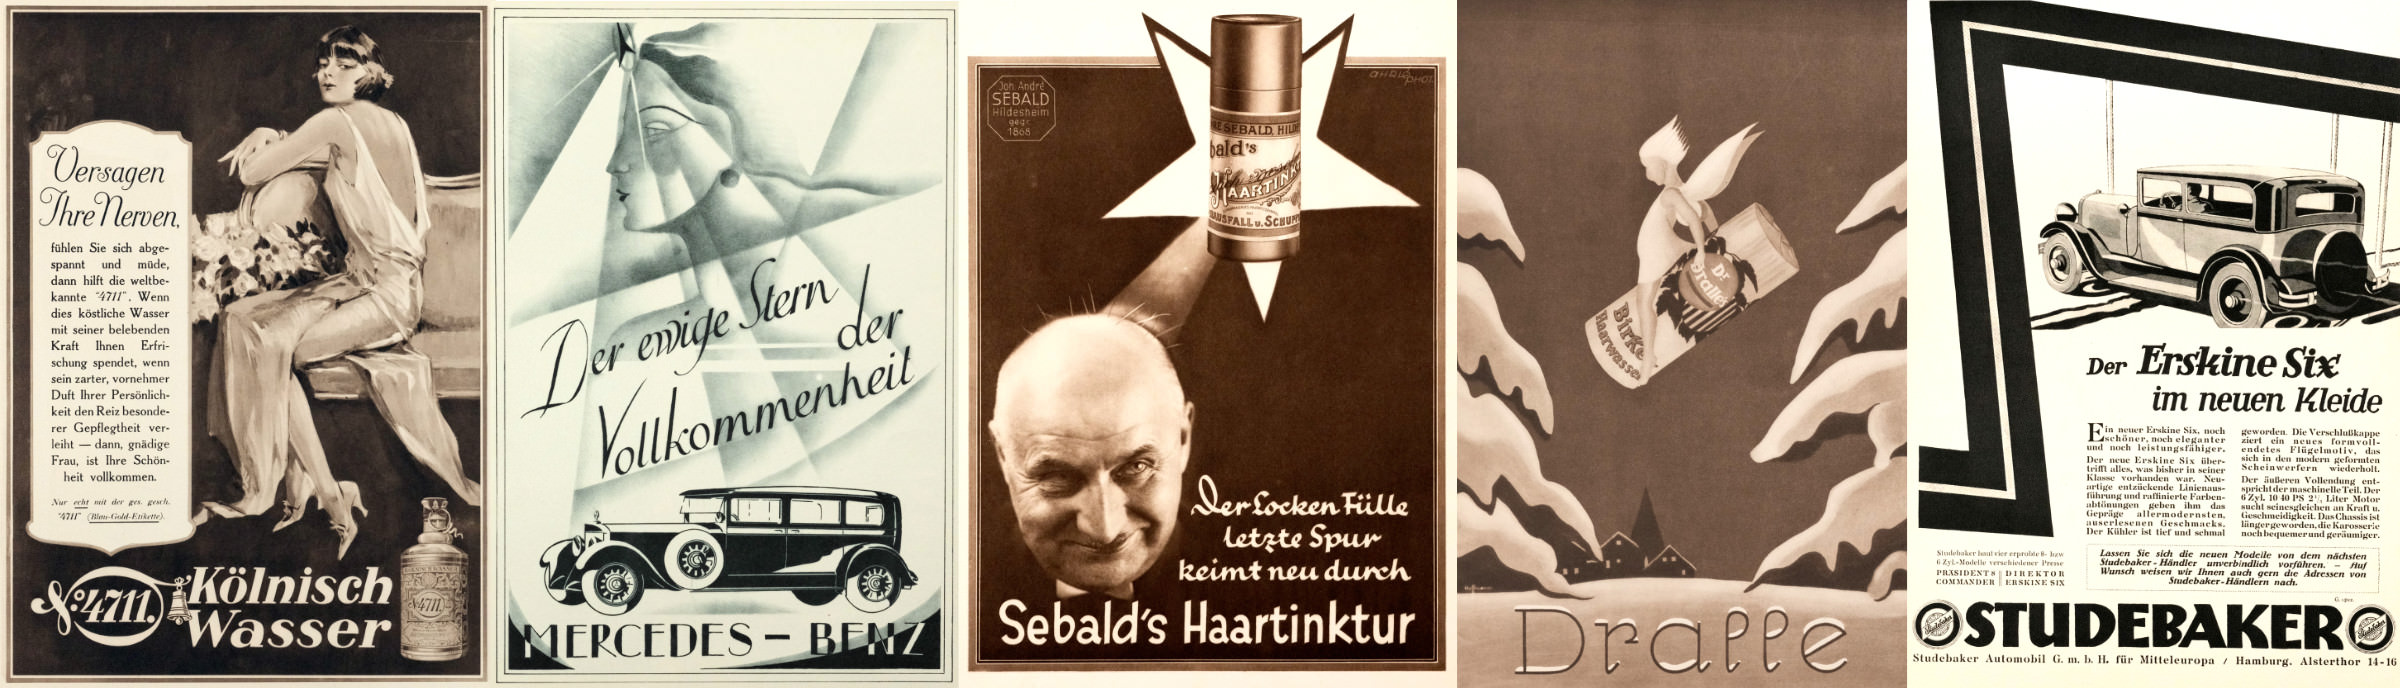 Typical ad campaigns from the time of the standardization work with very different, mostly artistic type styles